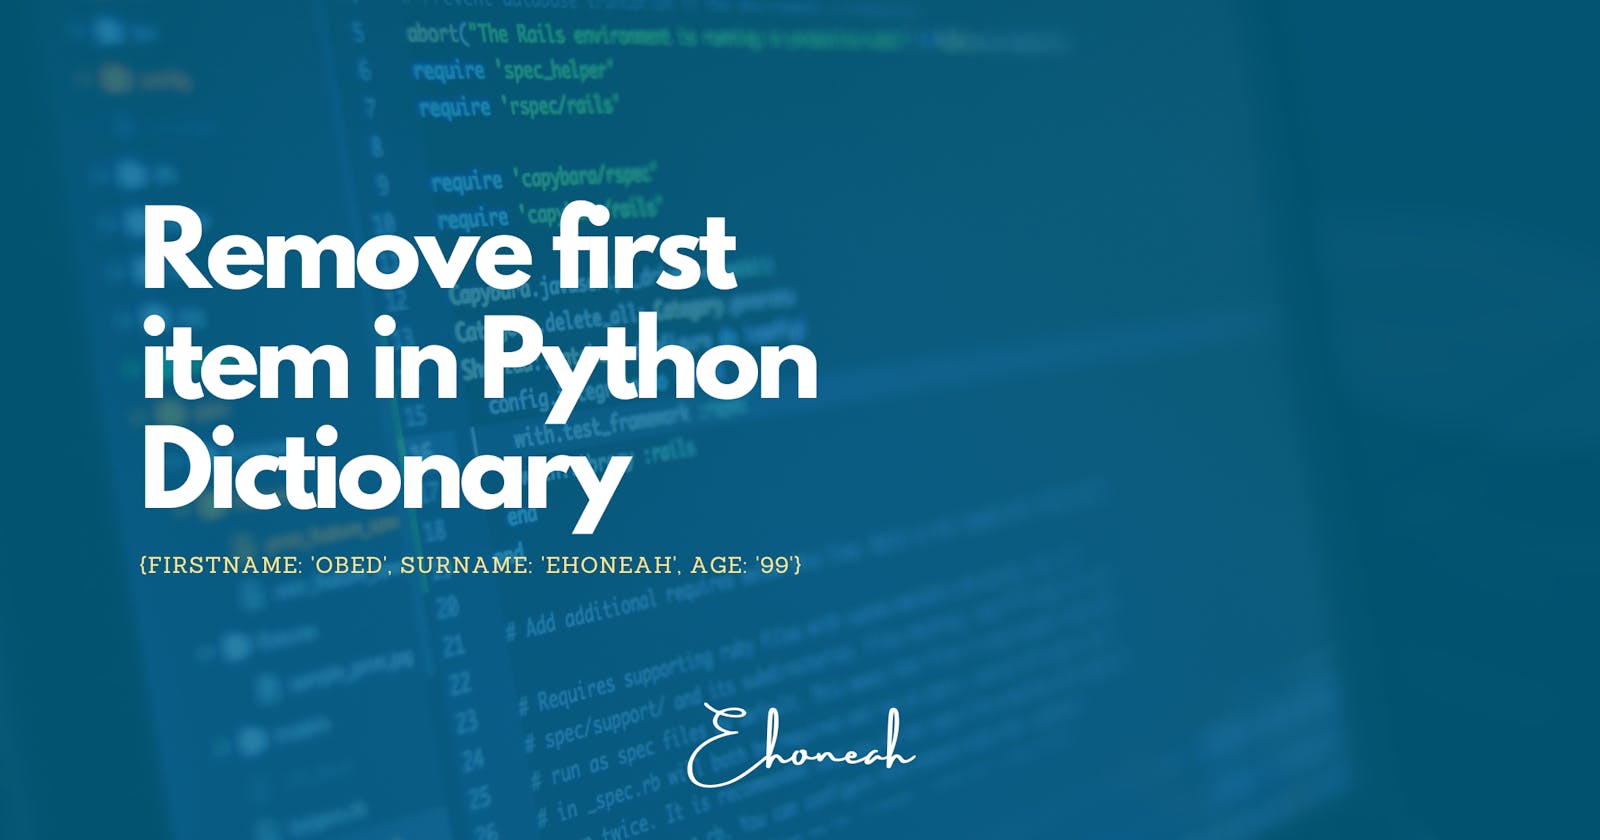 How to remove the first item in a Python Dictionary